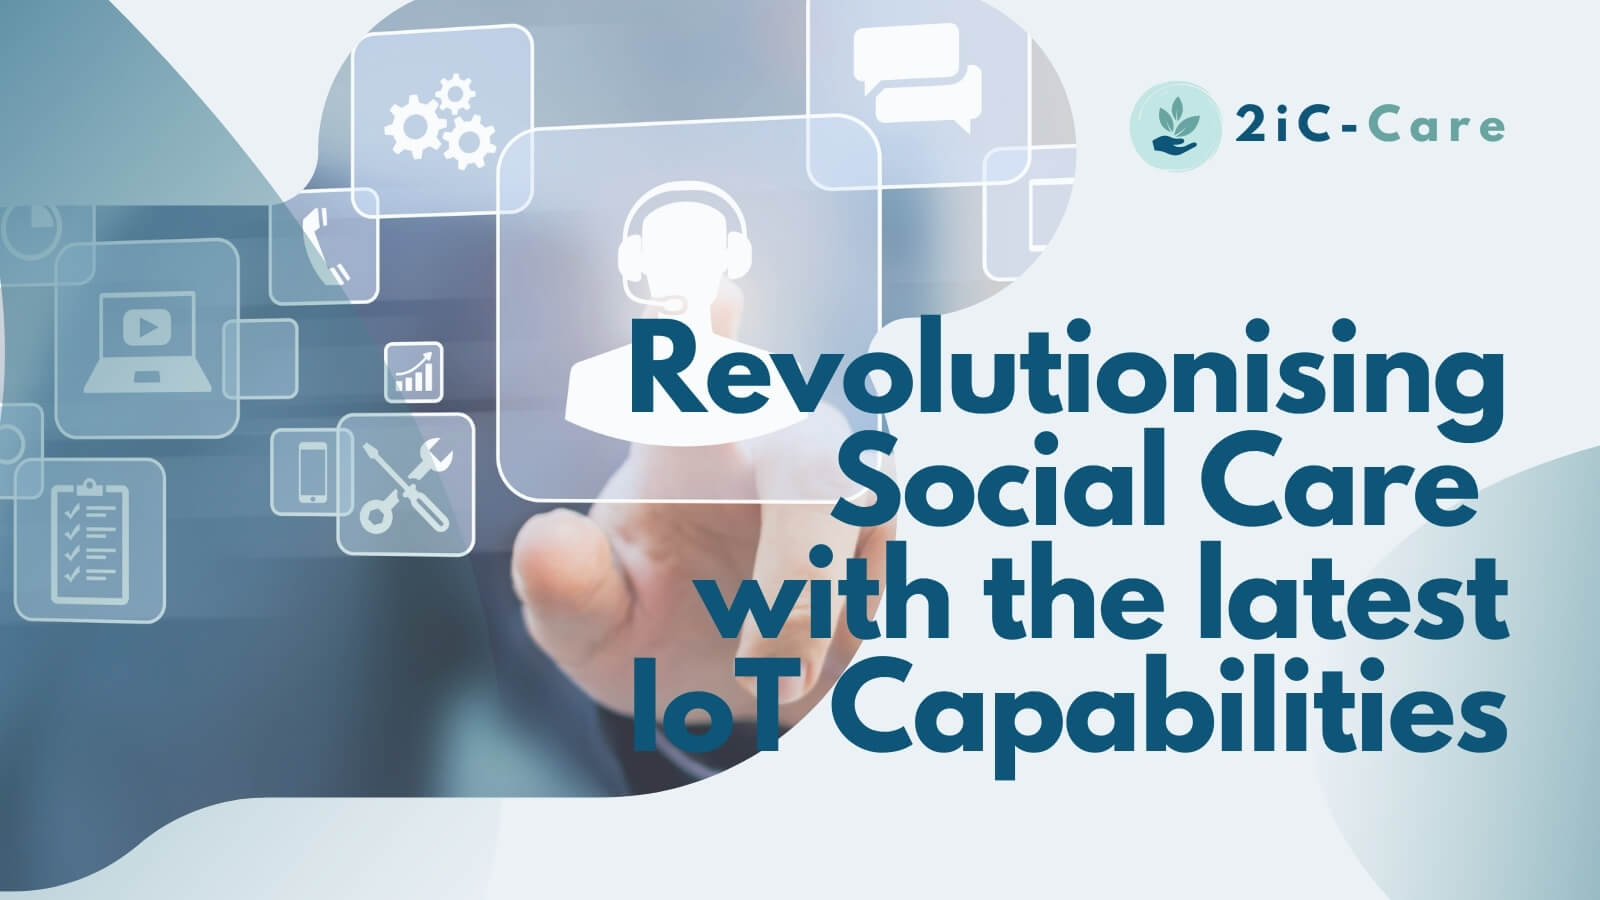 Revolutionising Social Care with the latest IoT Capabilities